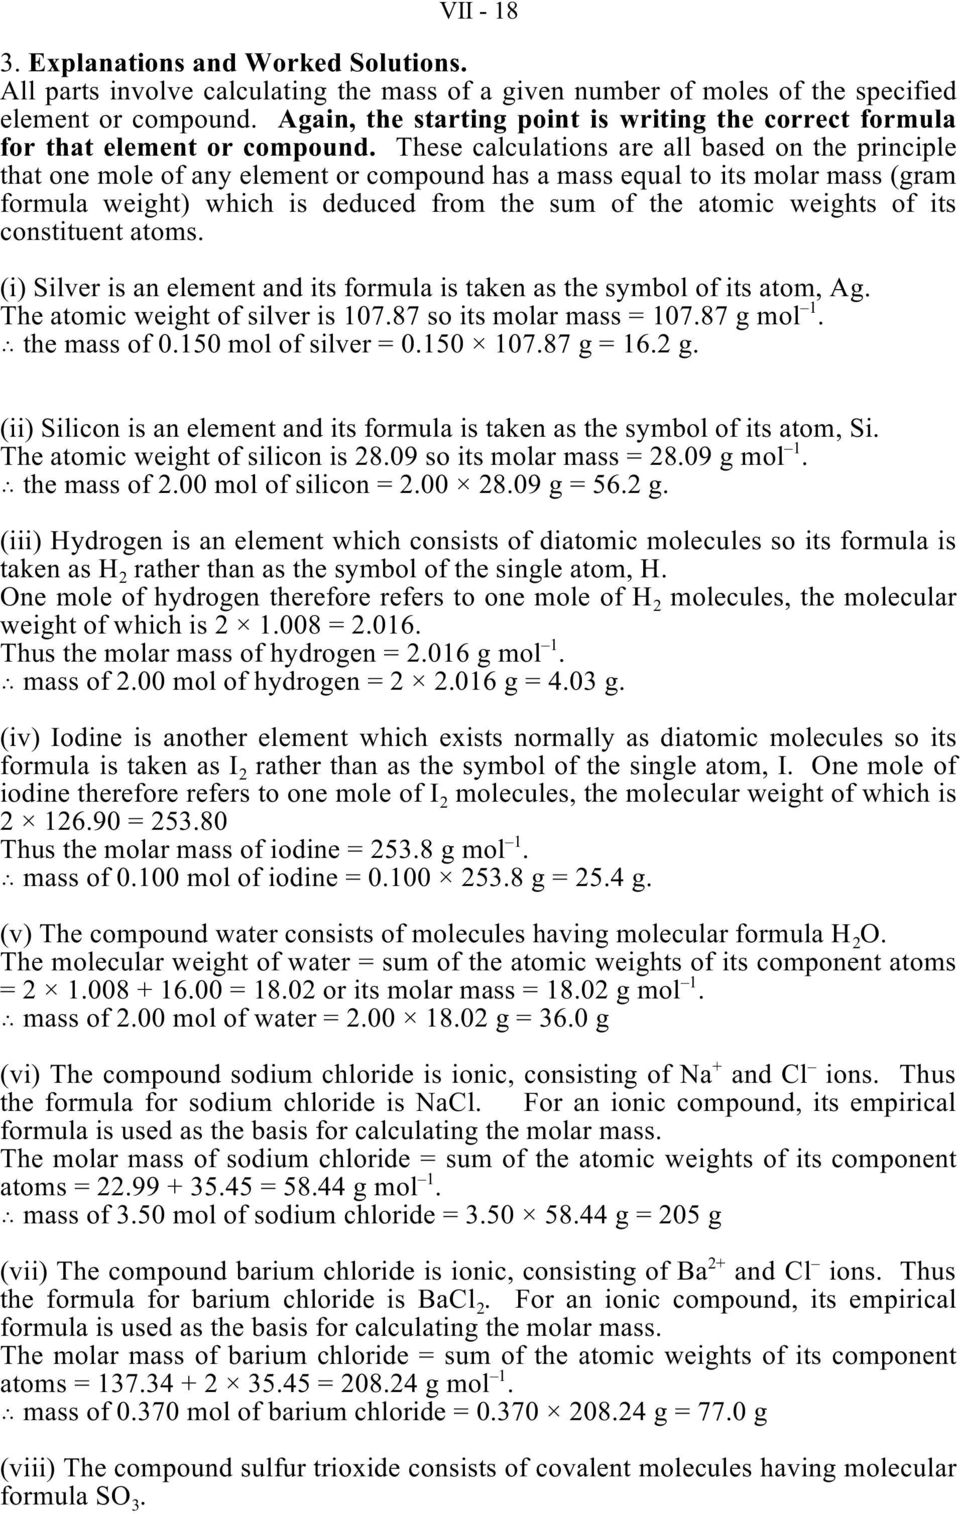 These calculations are all based on the principle that one mole of any element or compound has a mass equal to its molar mass (gram formula weight) which is deduced from the sum of the atomic weights